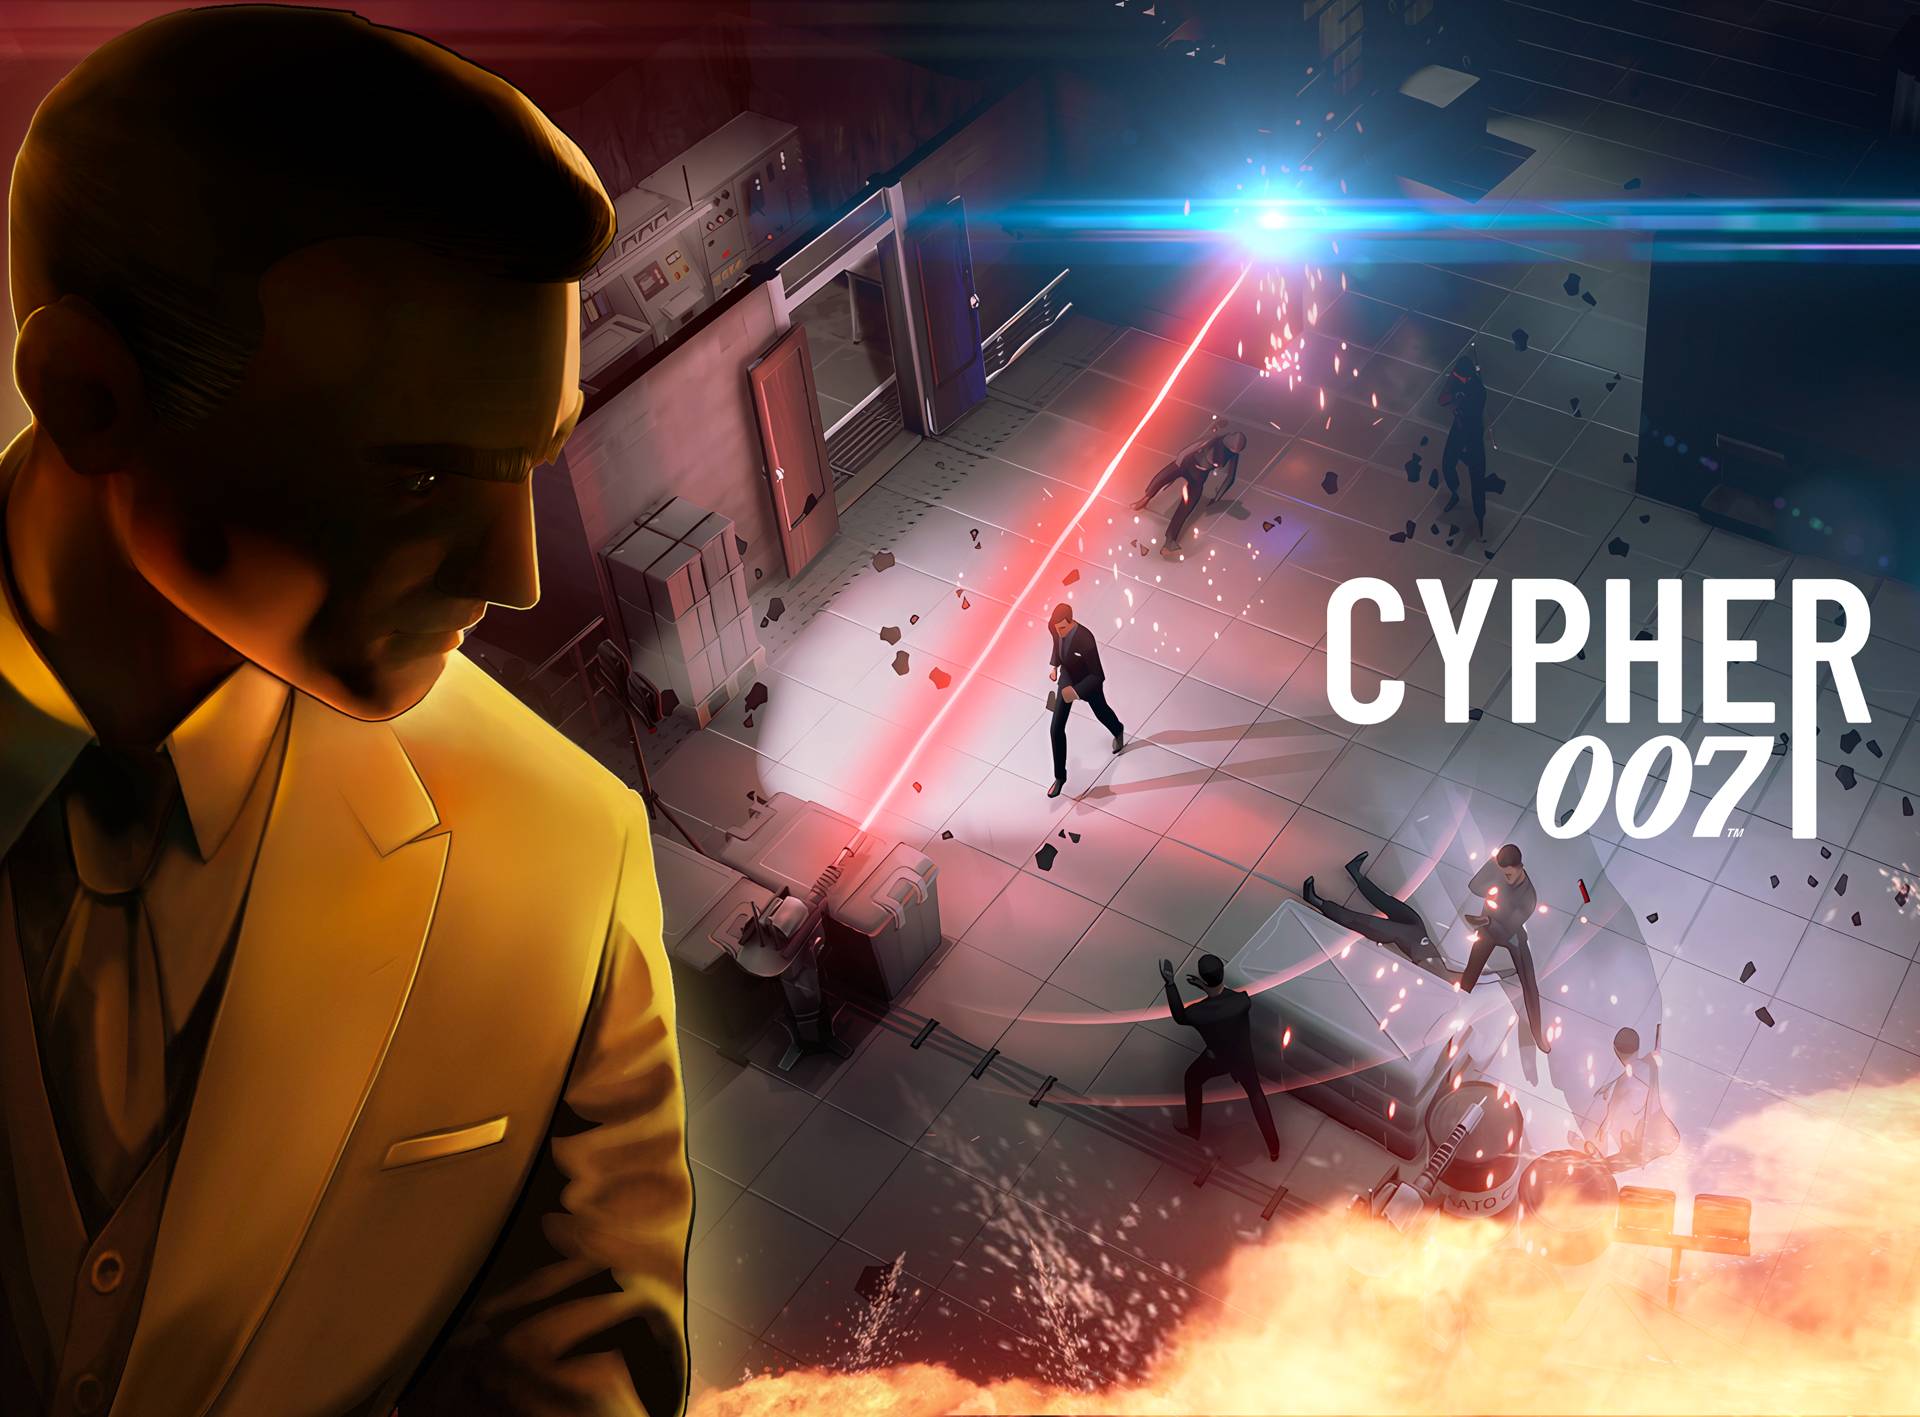 We've uncovered the secret of the Cypher 007 release date